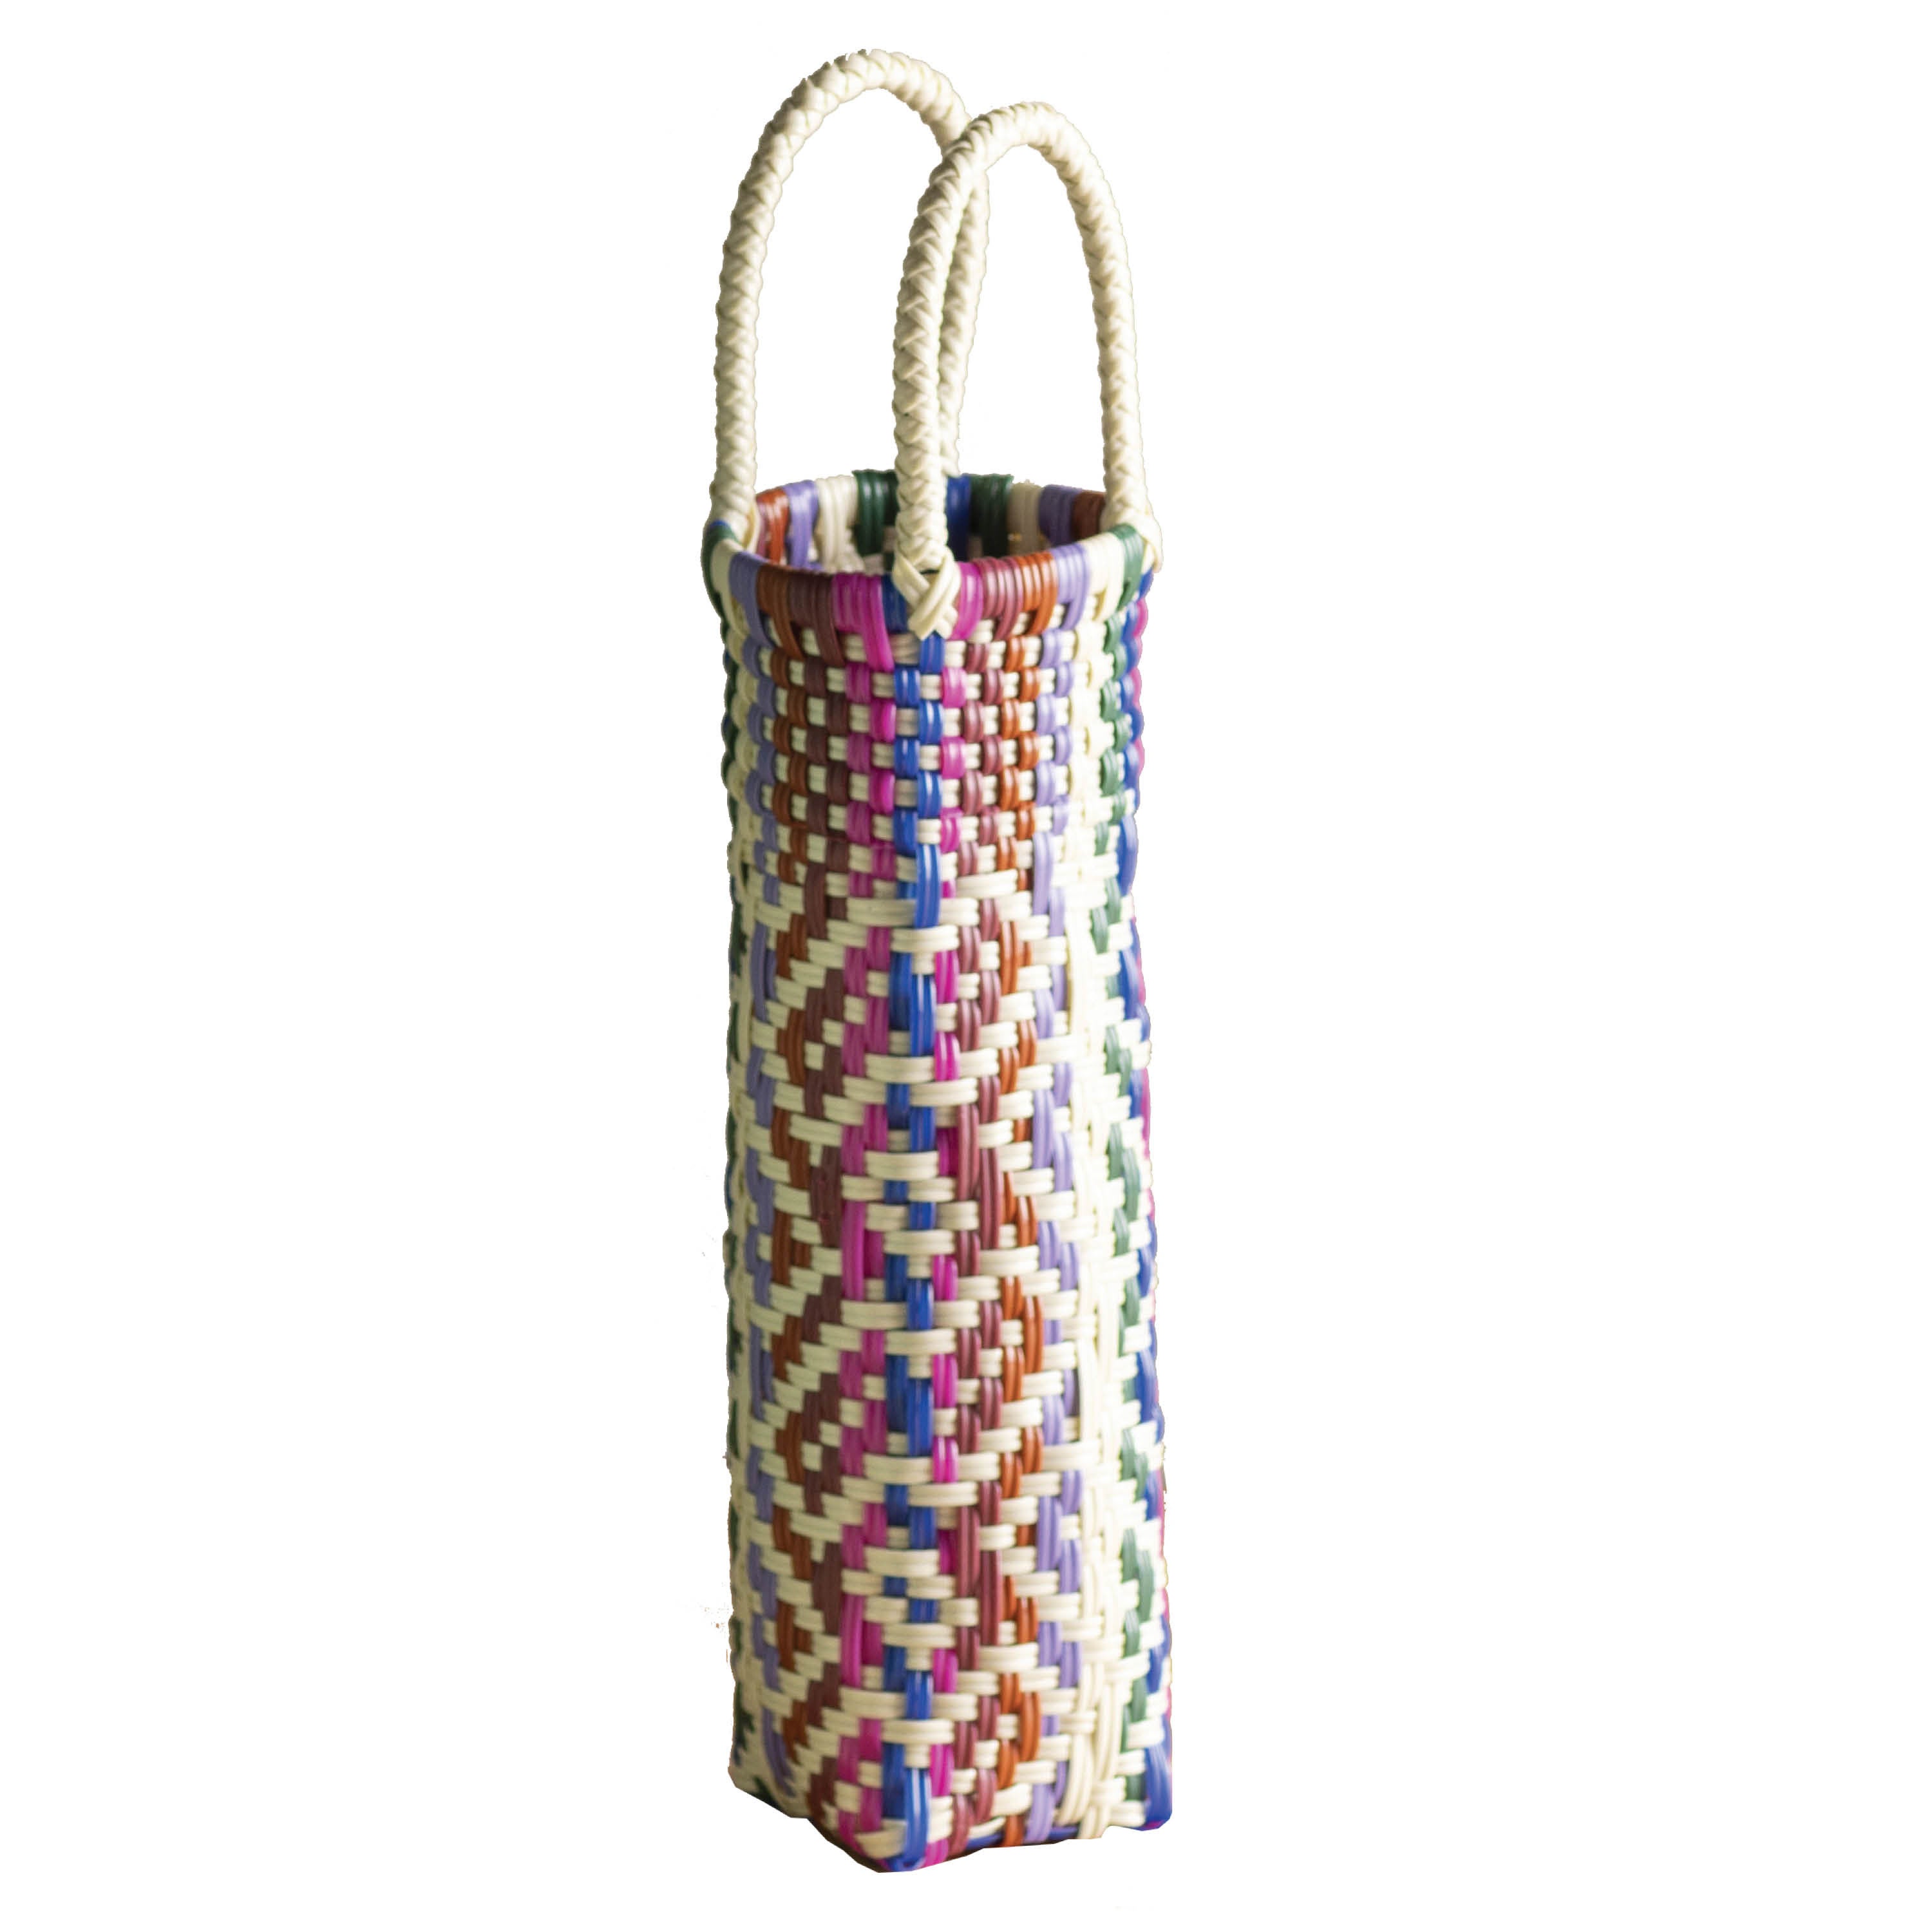 Woven Recycled Plastic Wine Tote swatch image